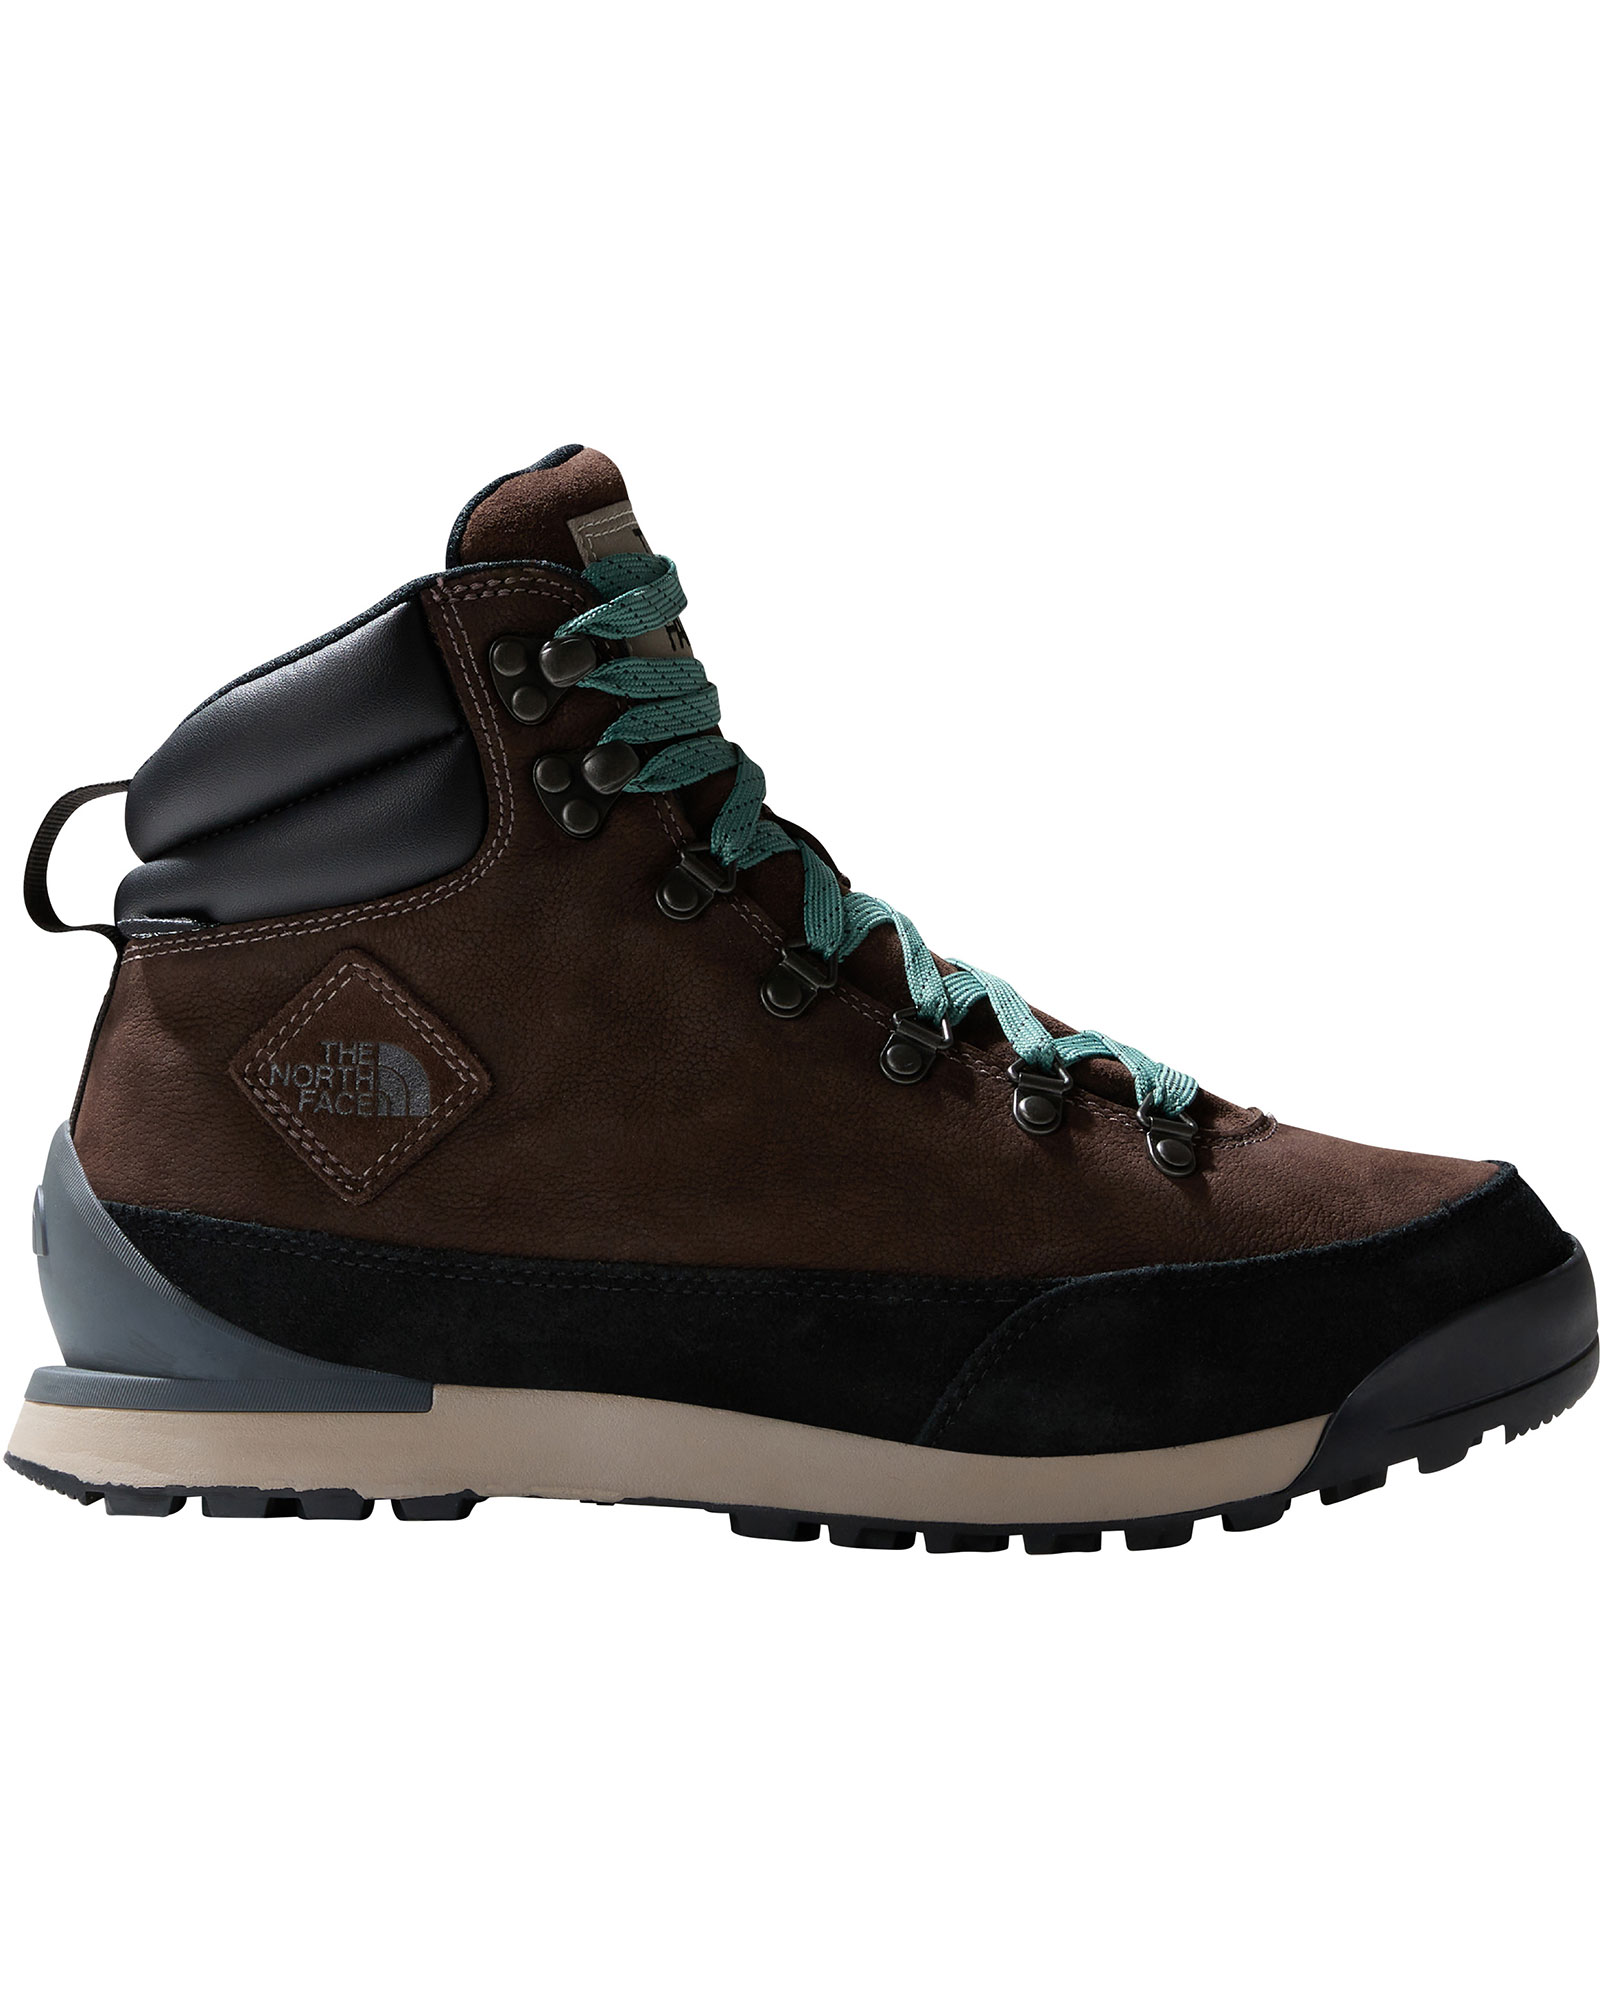 The North Face Back to Berkeley IV Leather Waterproof Men’s Boots - Demitasse Brown/TNF Black UK 8